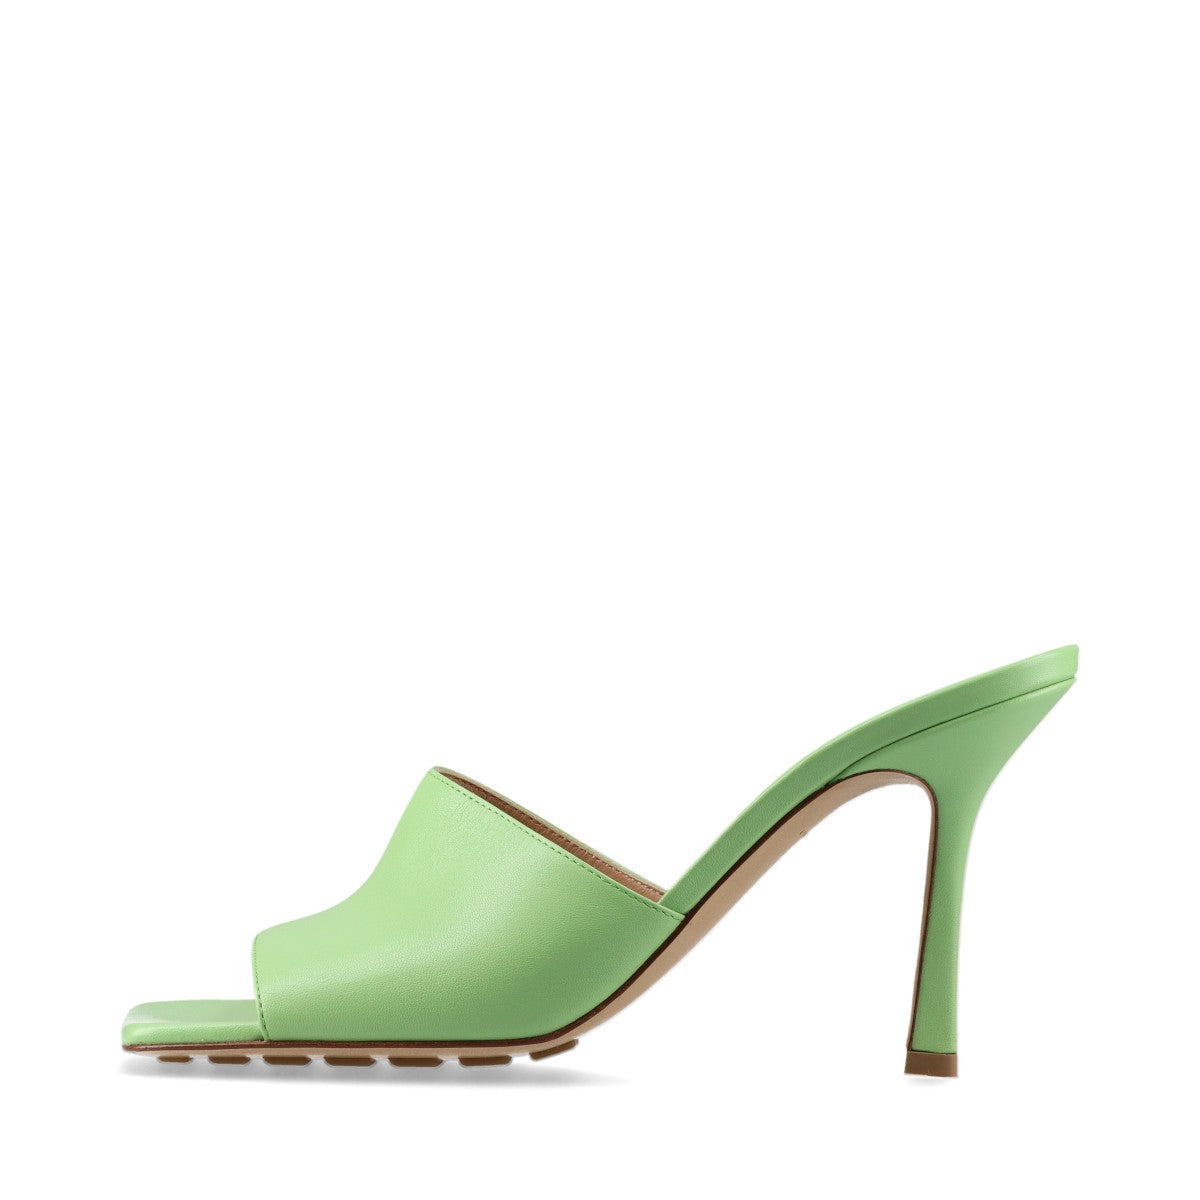 Bottega Veneta Leather Sandals 39 Ladies' light green replacement lift There is a storage bag stretching